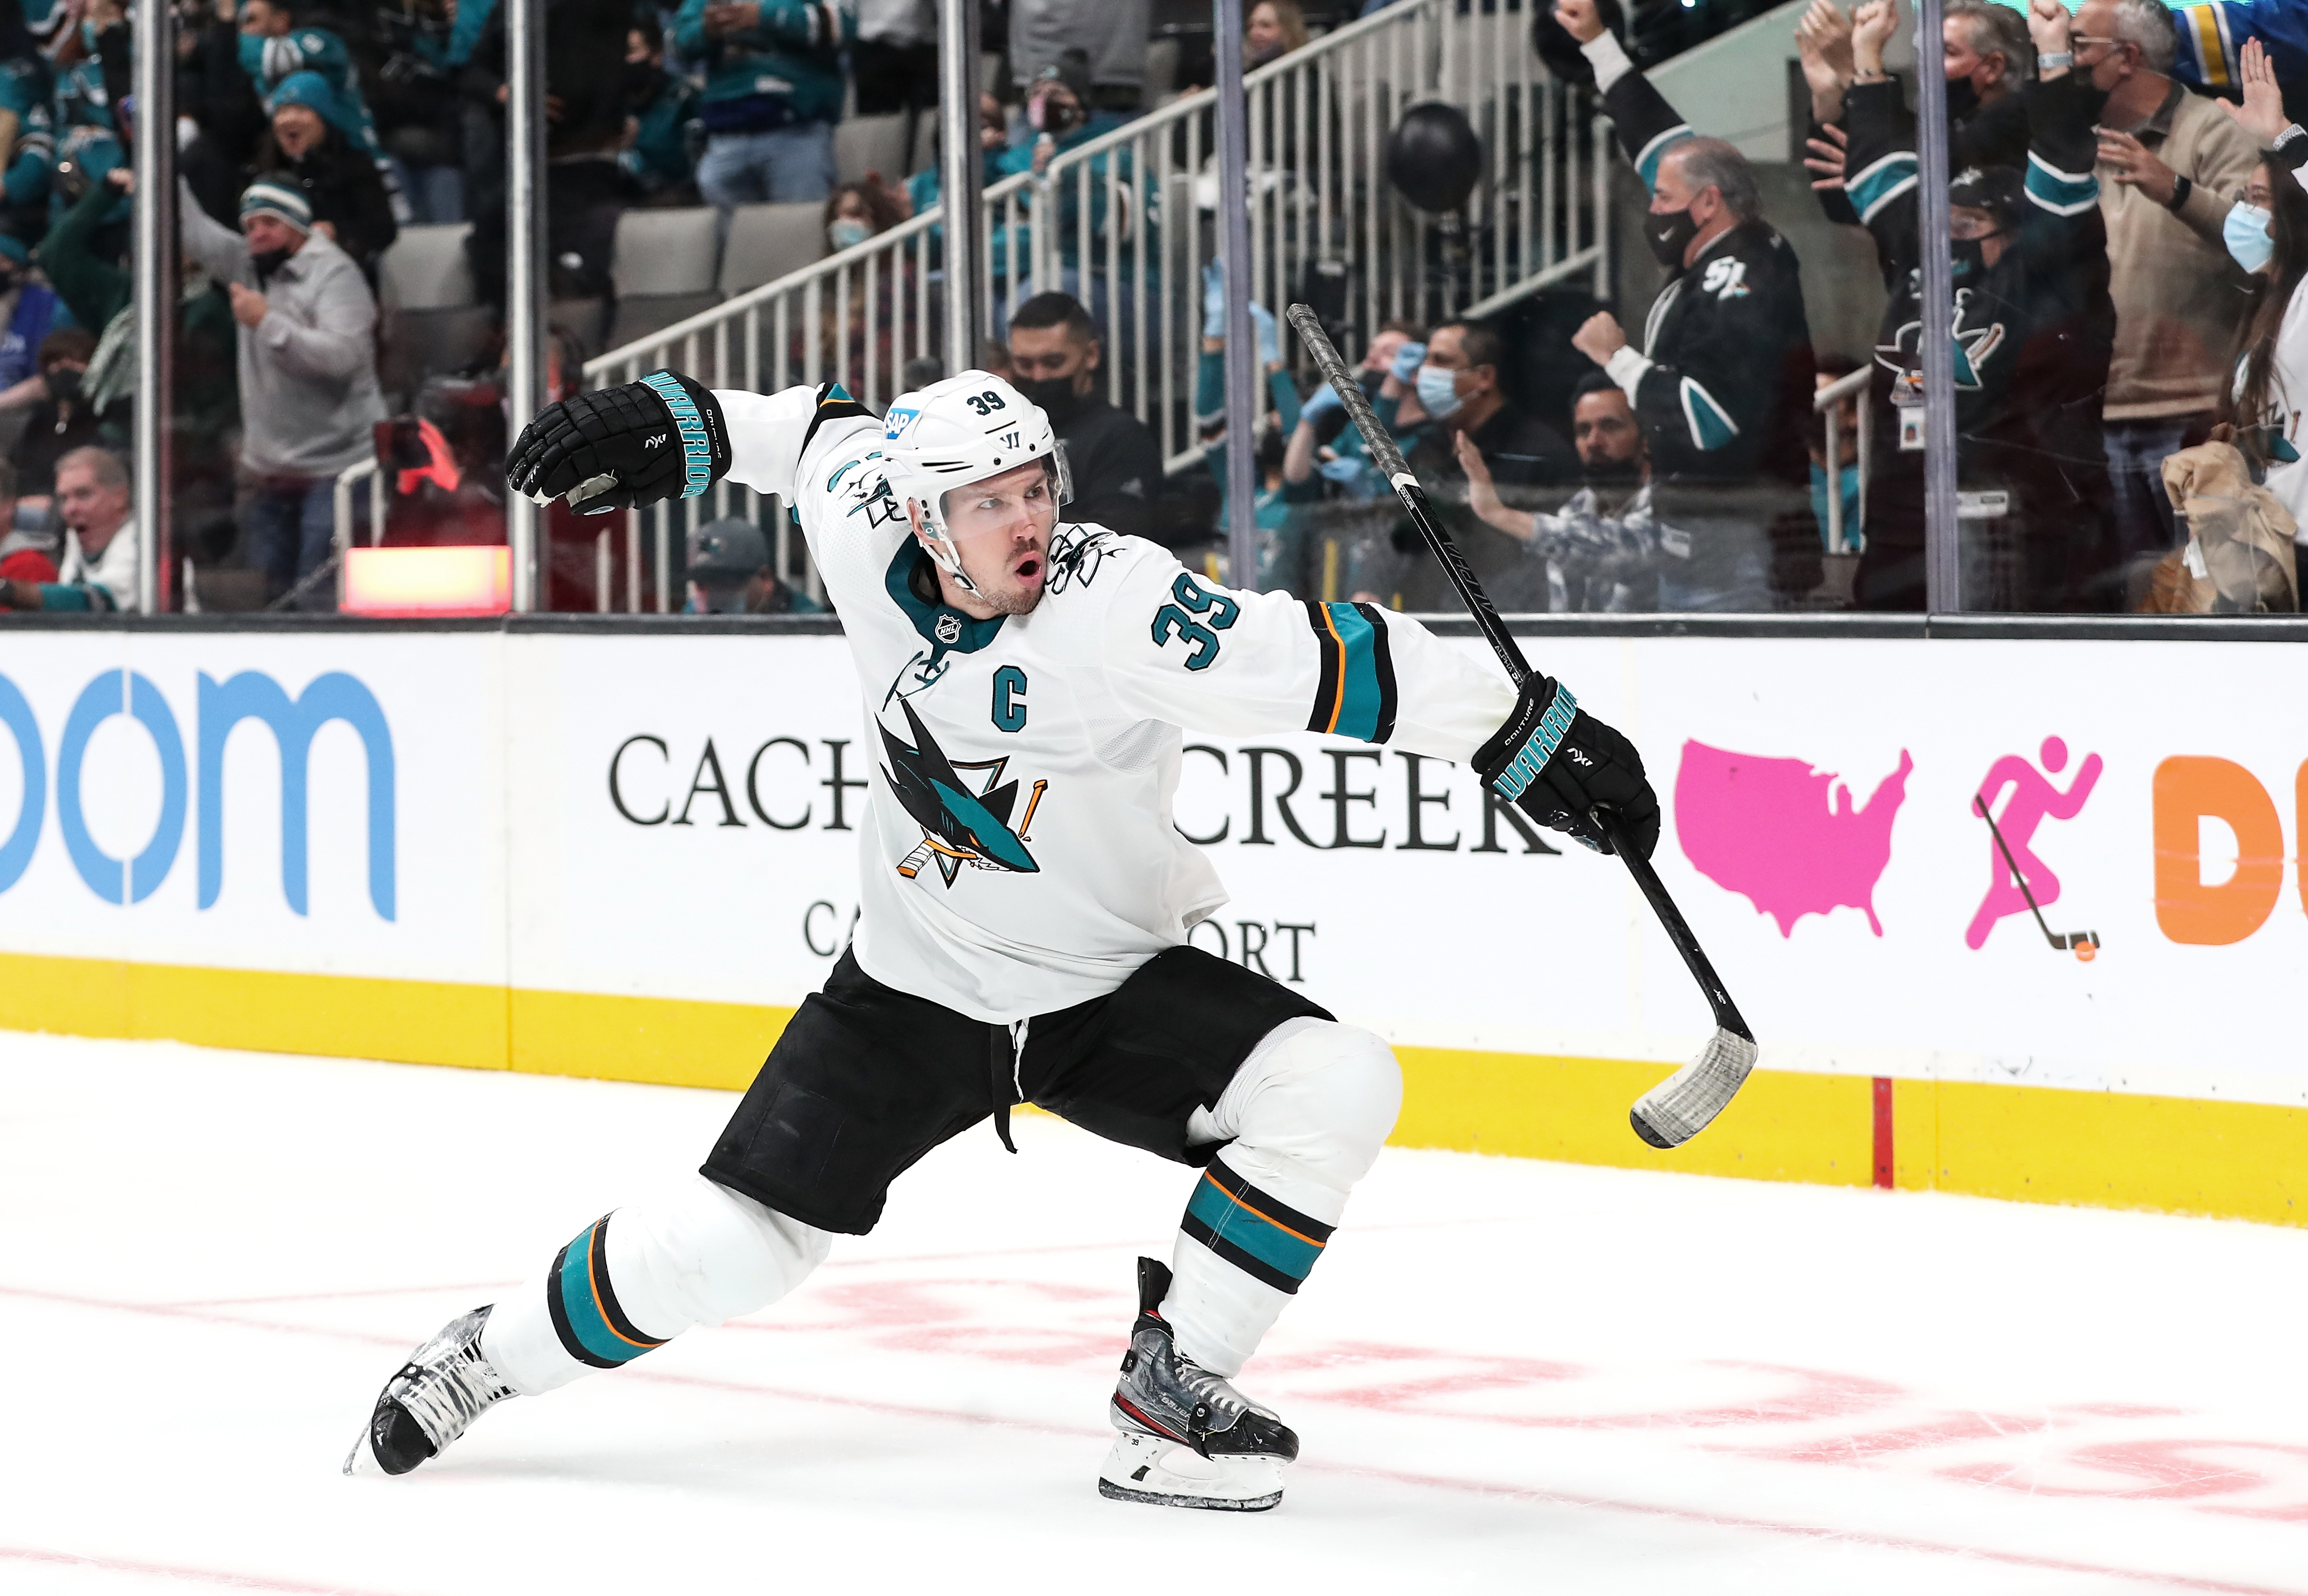 Logan Couture #39 of the San Jose Sharks celebrates scoring the game-winning goal in overtime against the Detroit Red Wings at SAP Center on January 11, 2022 in San Jose, California.